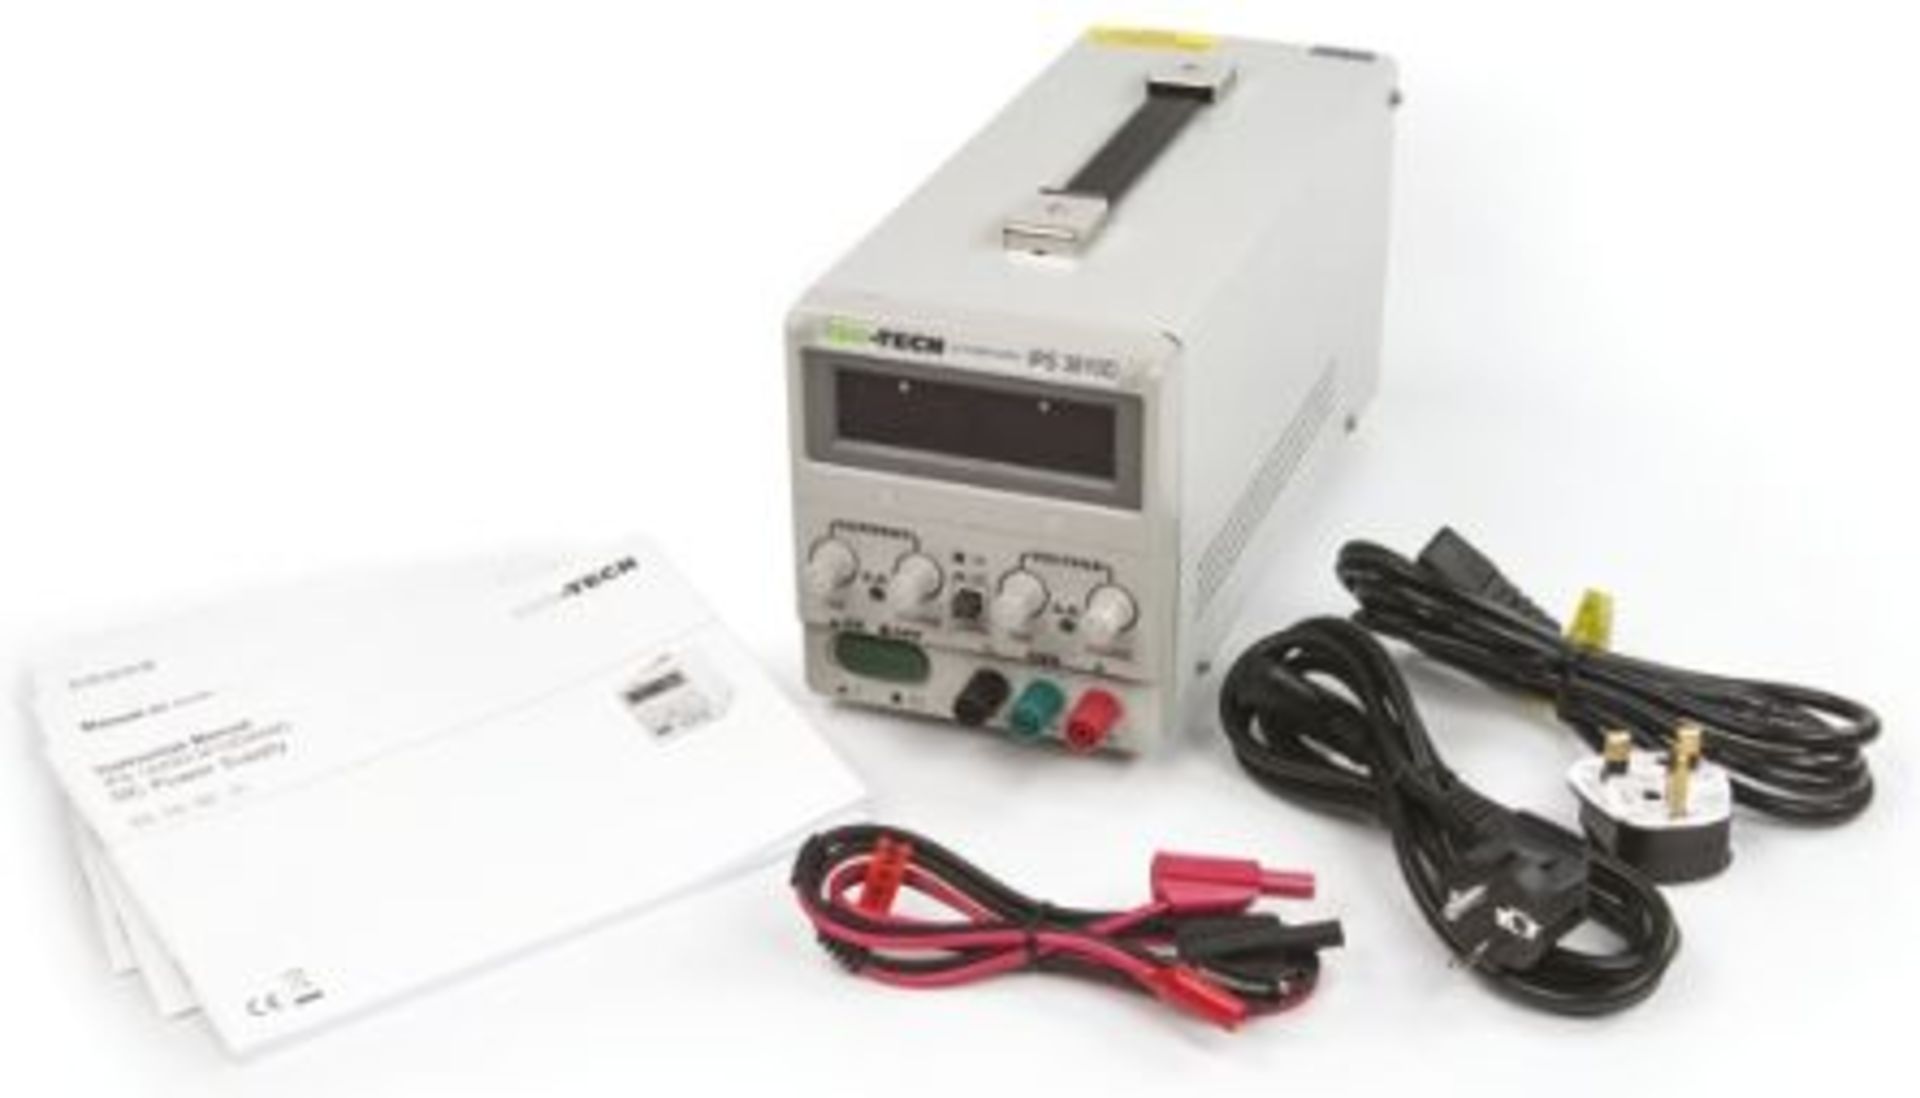 ISO-TECH IPS-3610D Digital Bench Power Supply, 1 Output 0-36V 0-10A 500W - Image 3 of 3